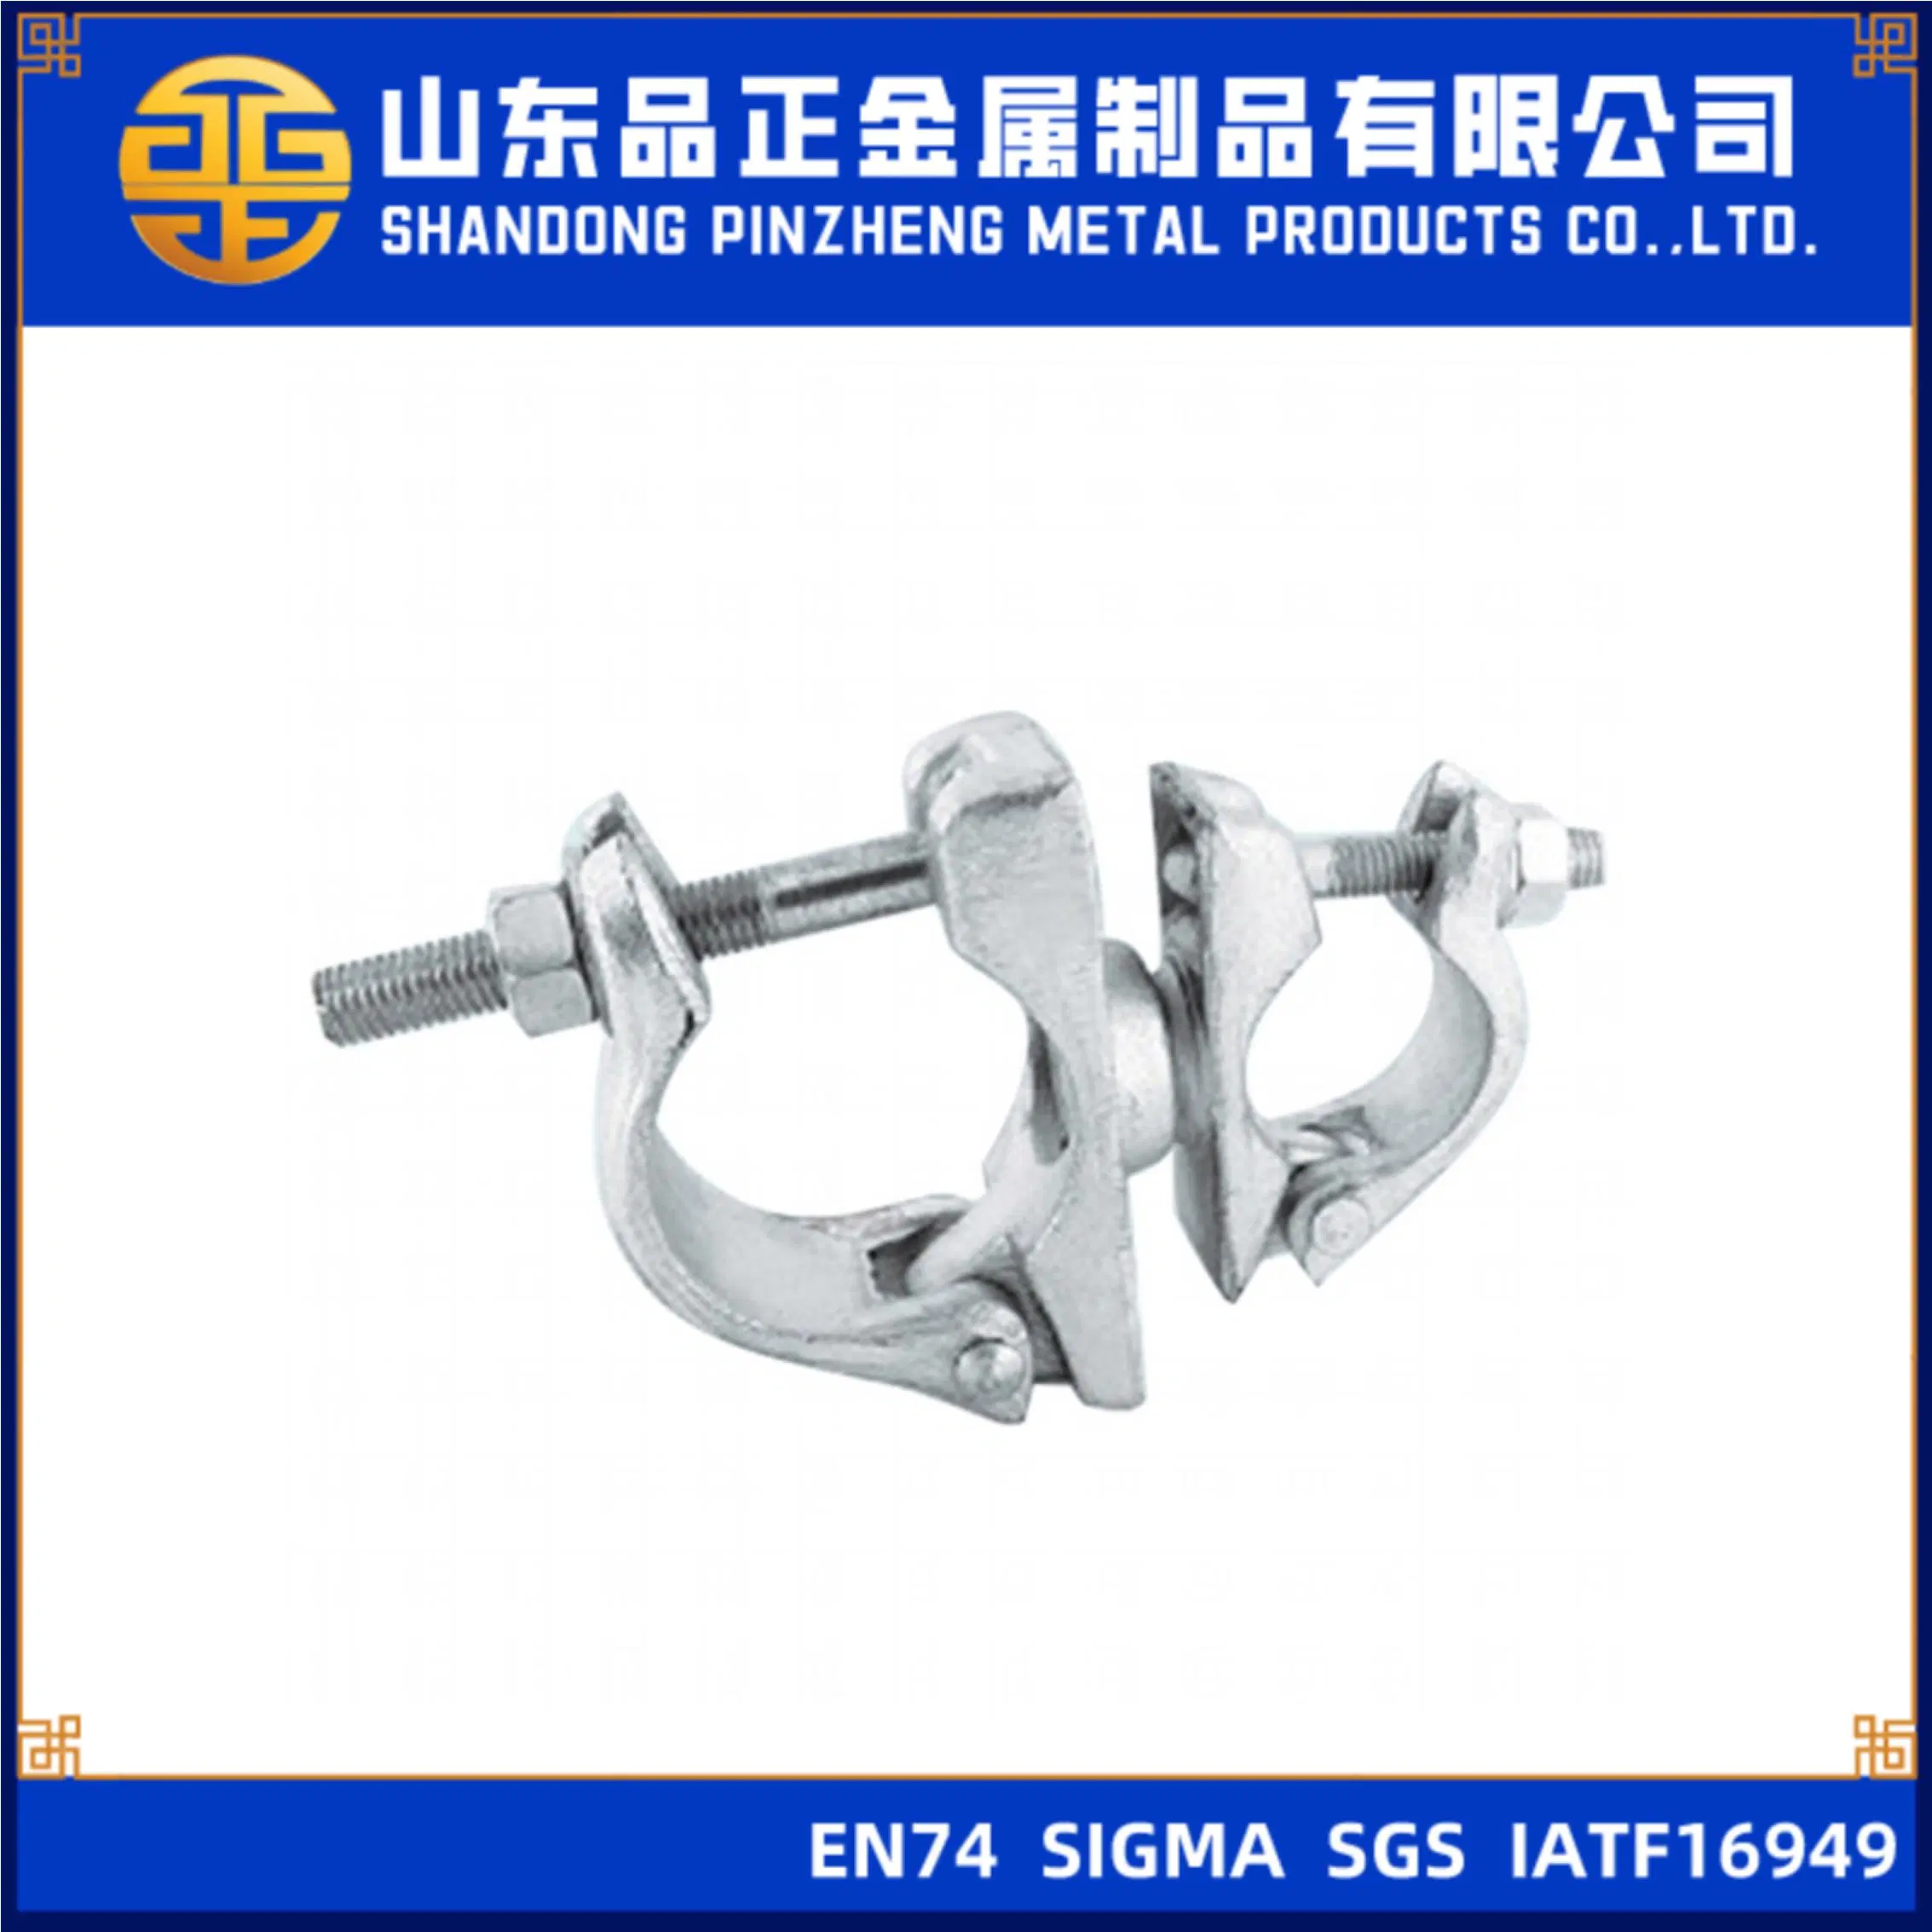 Building Pipe Connection Buckle Galvanized Fixed Swivel Forged Scaffolding American Type Coupler